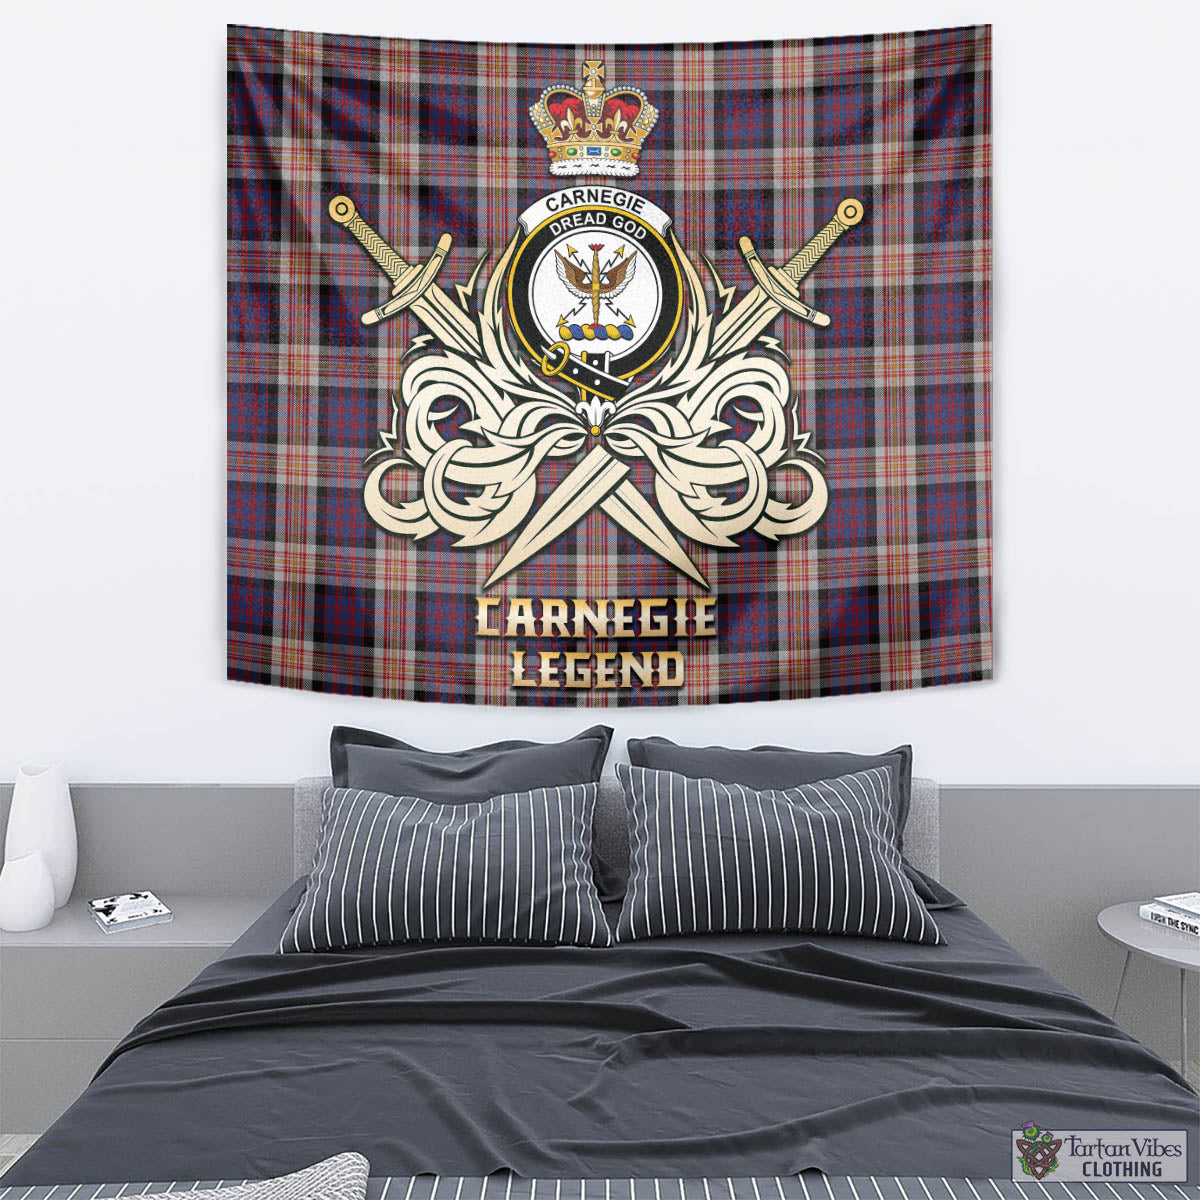 Tartan Vibes Clothing Carnegie Tartan Tapestry with Clan Crest and the Golden Sword of Courageous Legacy